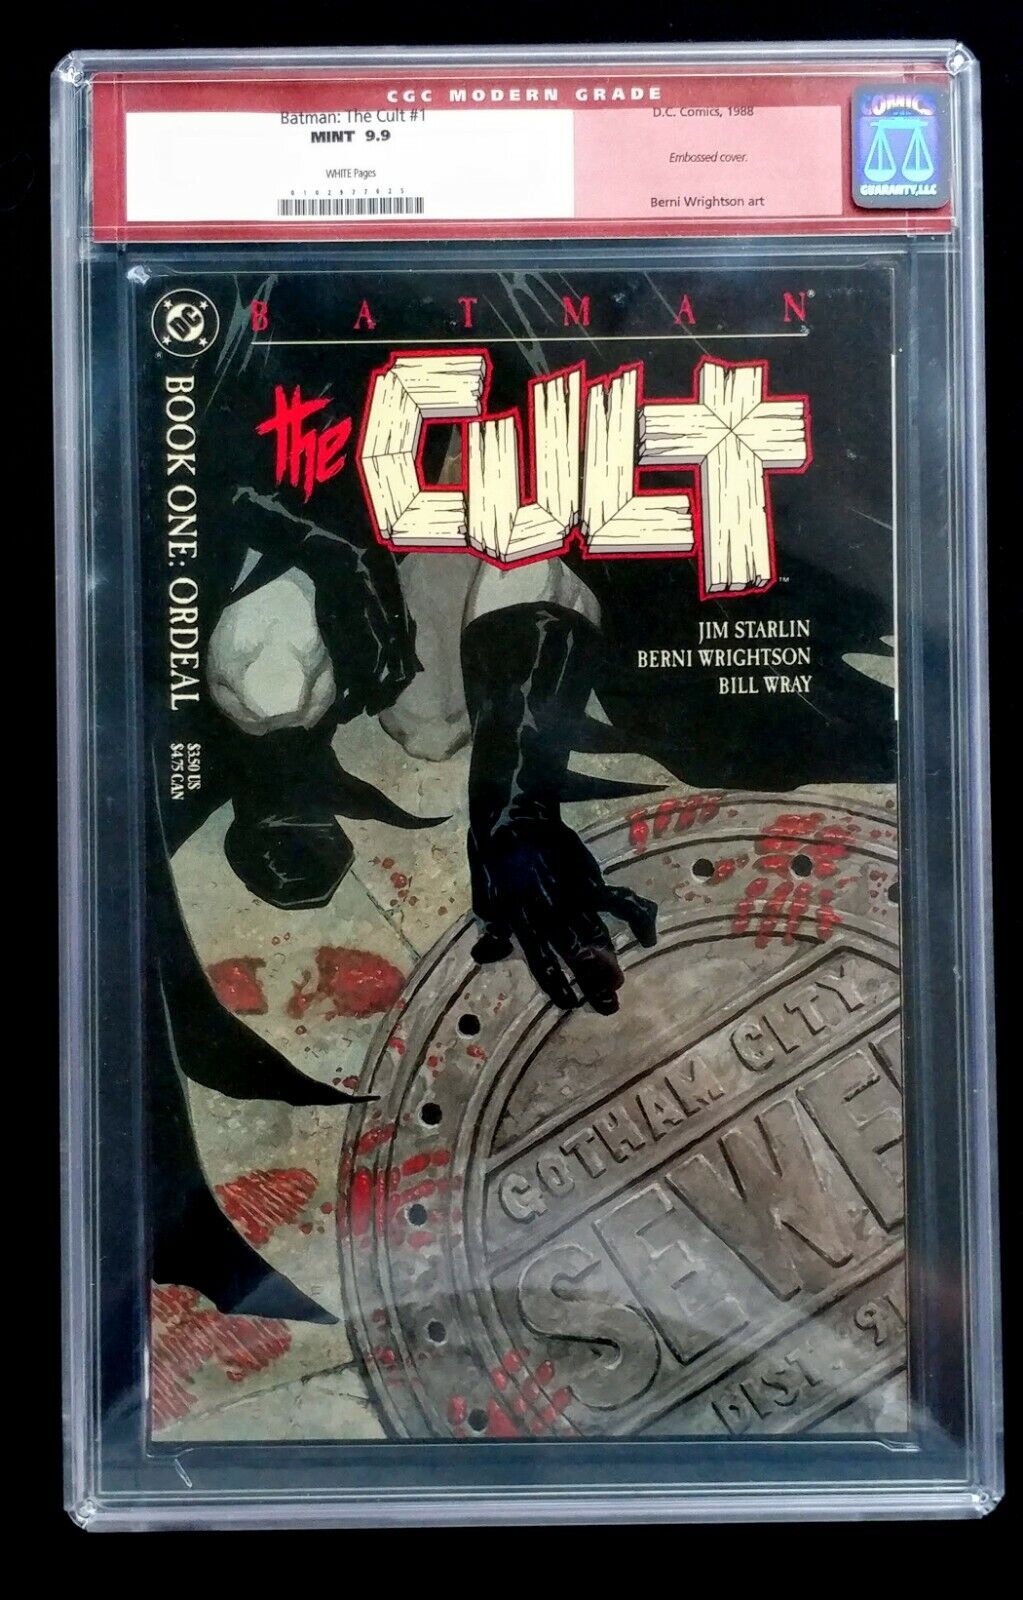 BATMAN: THE CULT CGC 9.9 OLD LABEL SUPER NICE  1988 EMBOSSED COVER